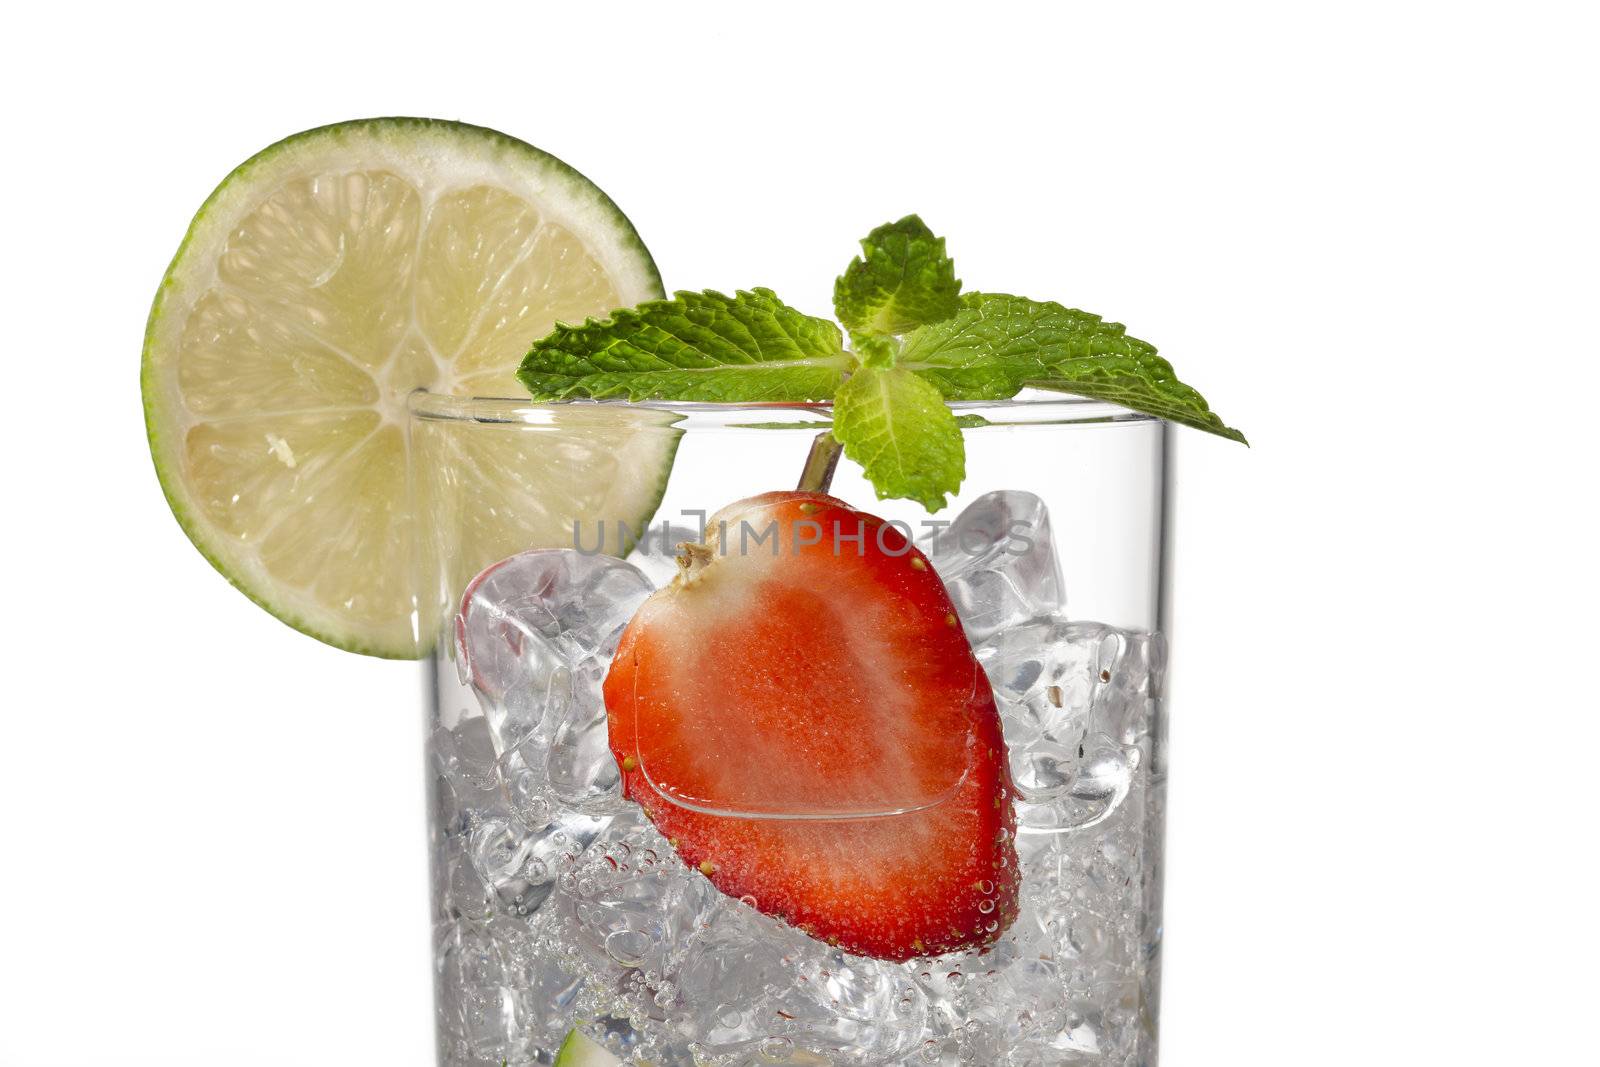 cropped image of a glass with ice cubes strawberry slice and lem by kozzi